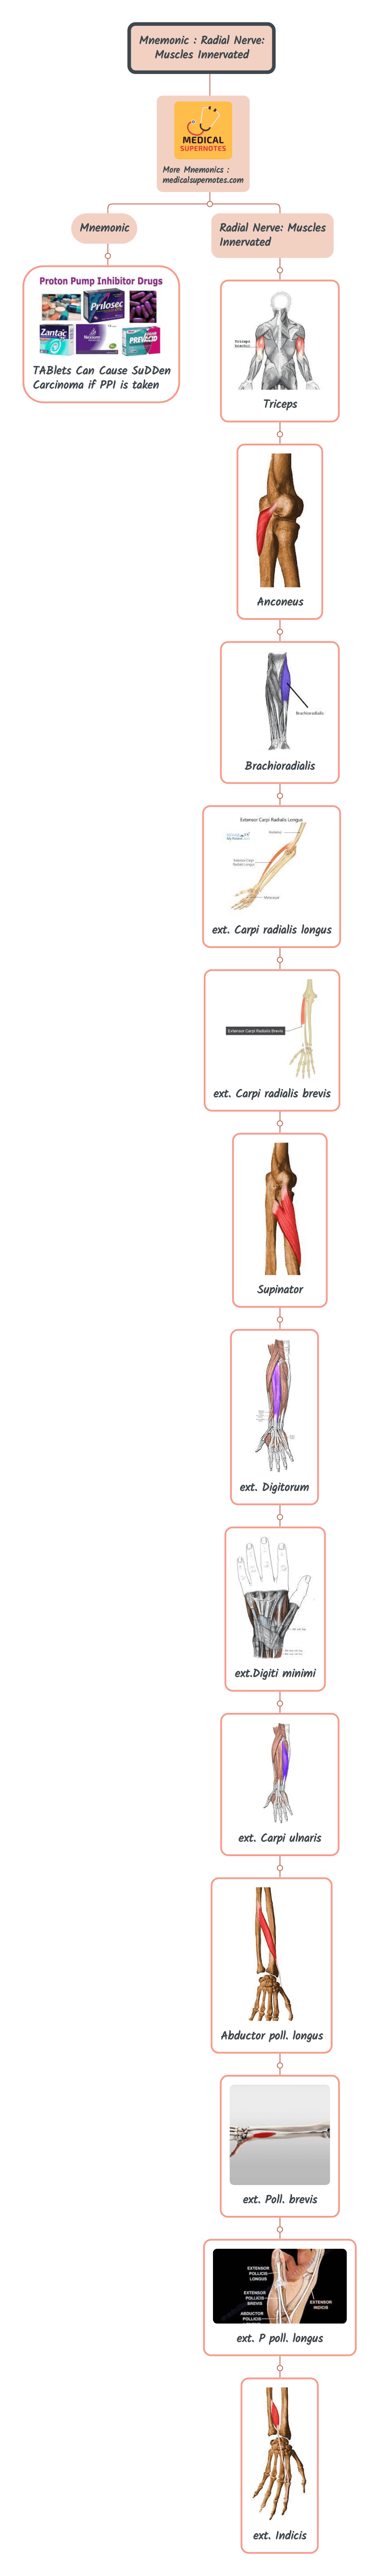 Mnemonic _ Radial Nerve_ Muscles Innervated